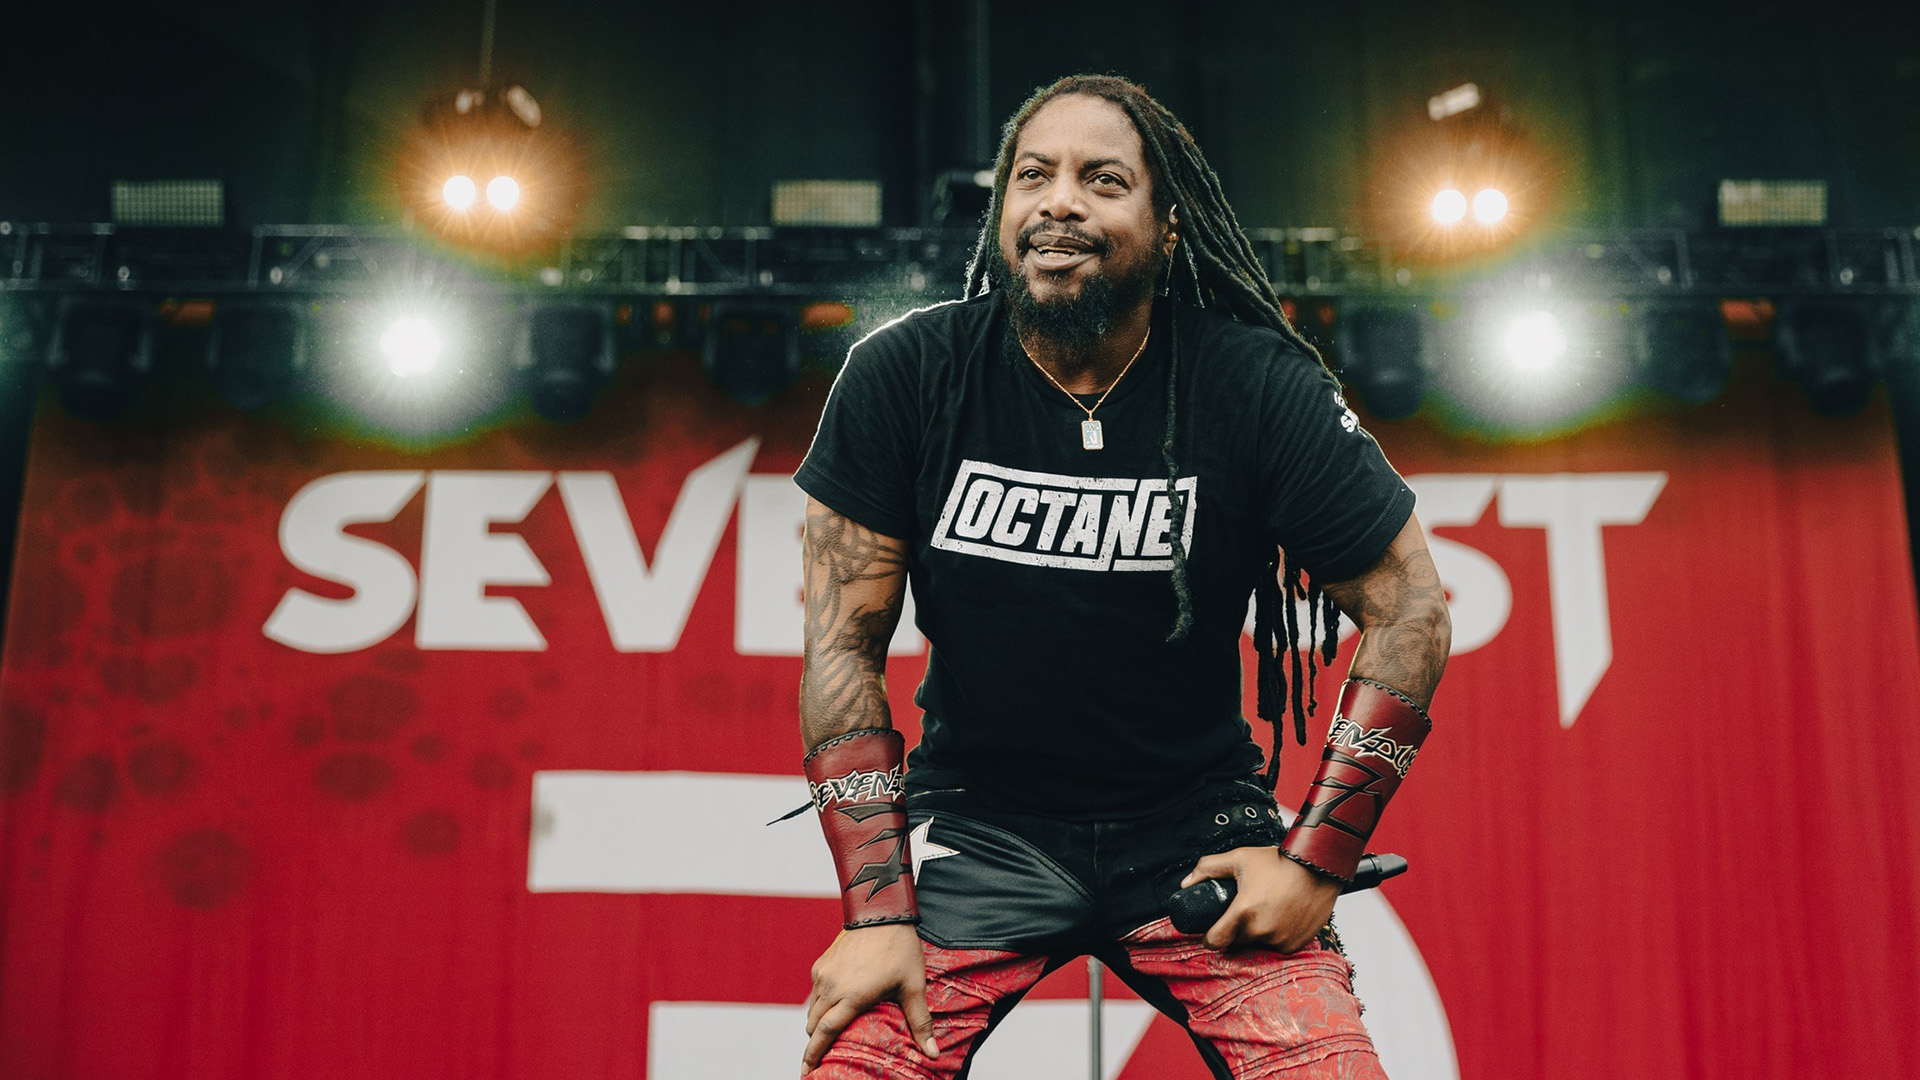 Lajon Witherspoon Sevendust on stage in an Octane shirt